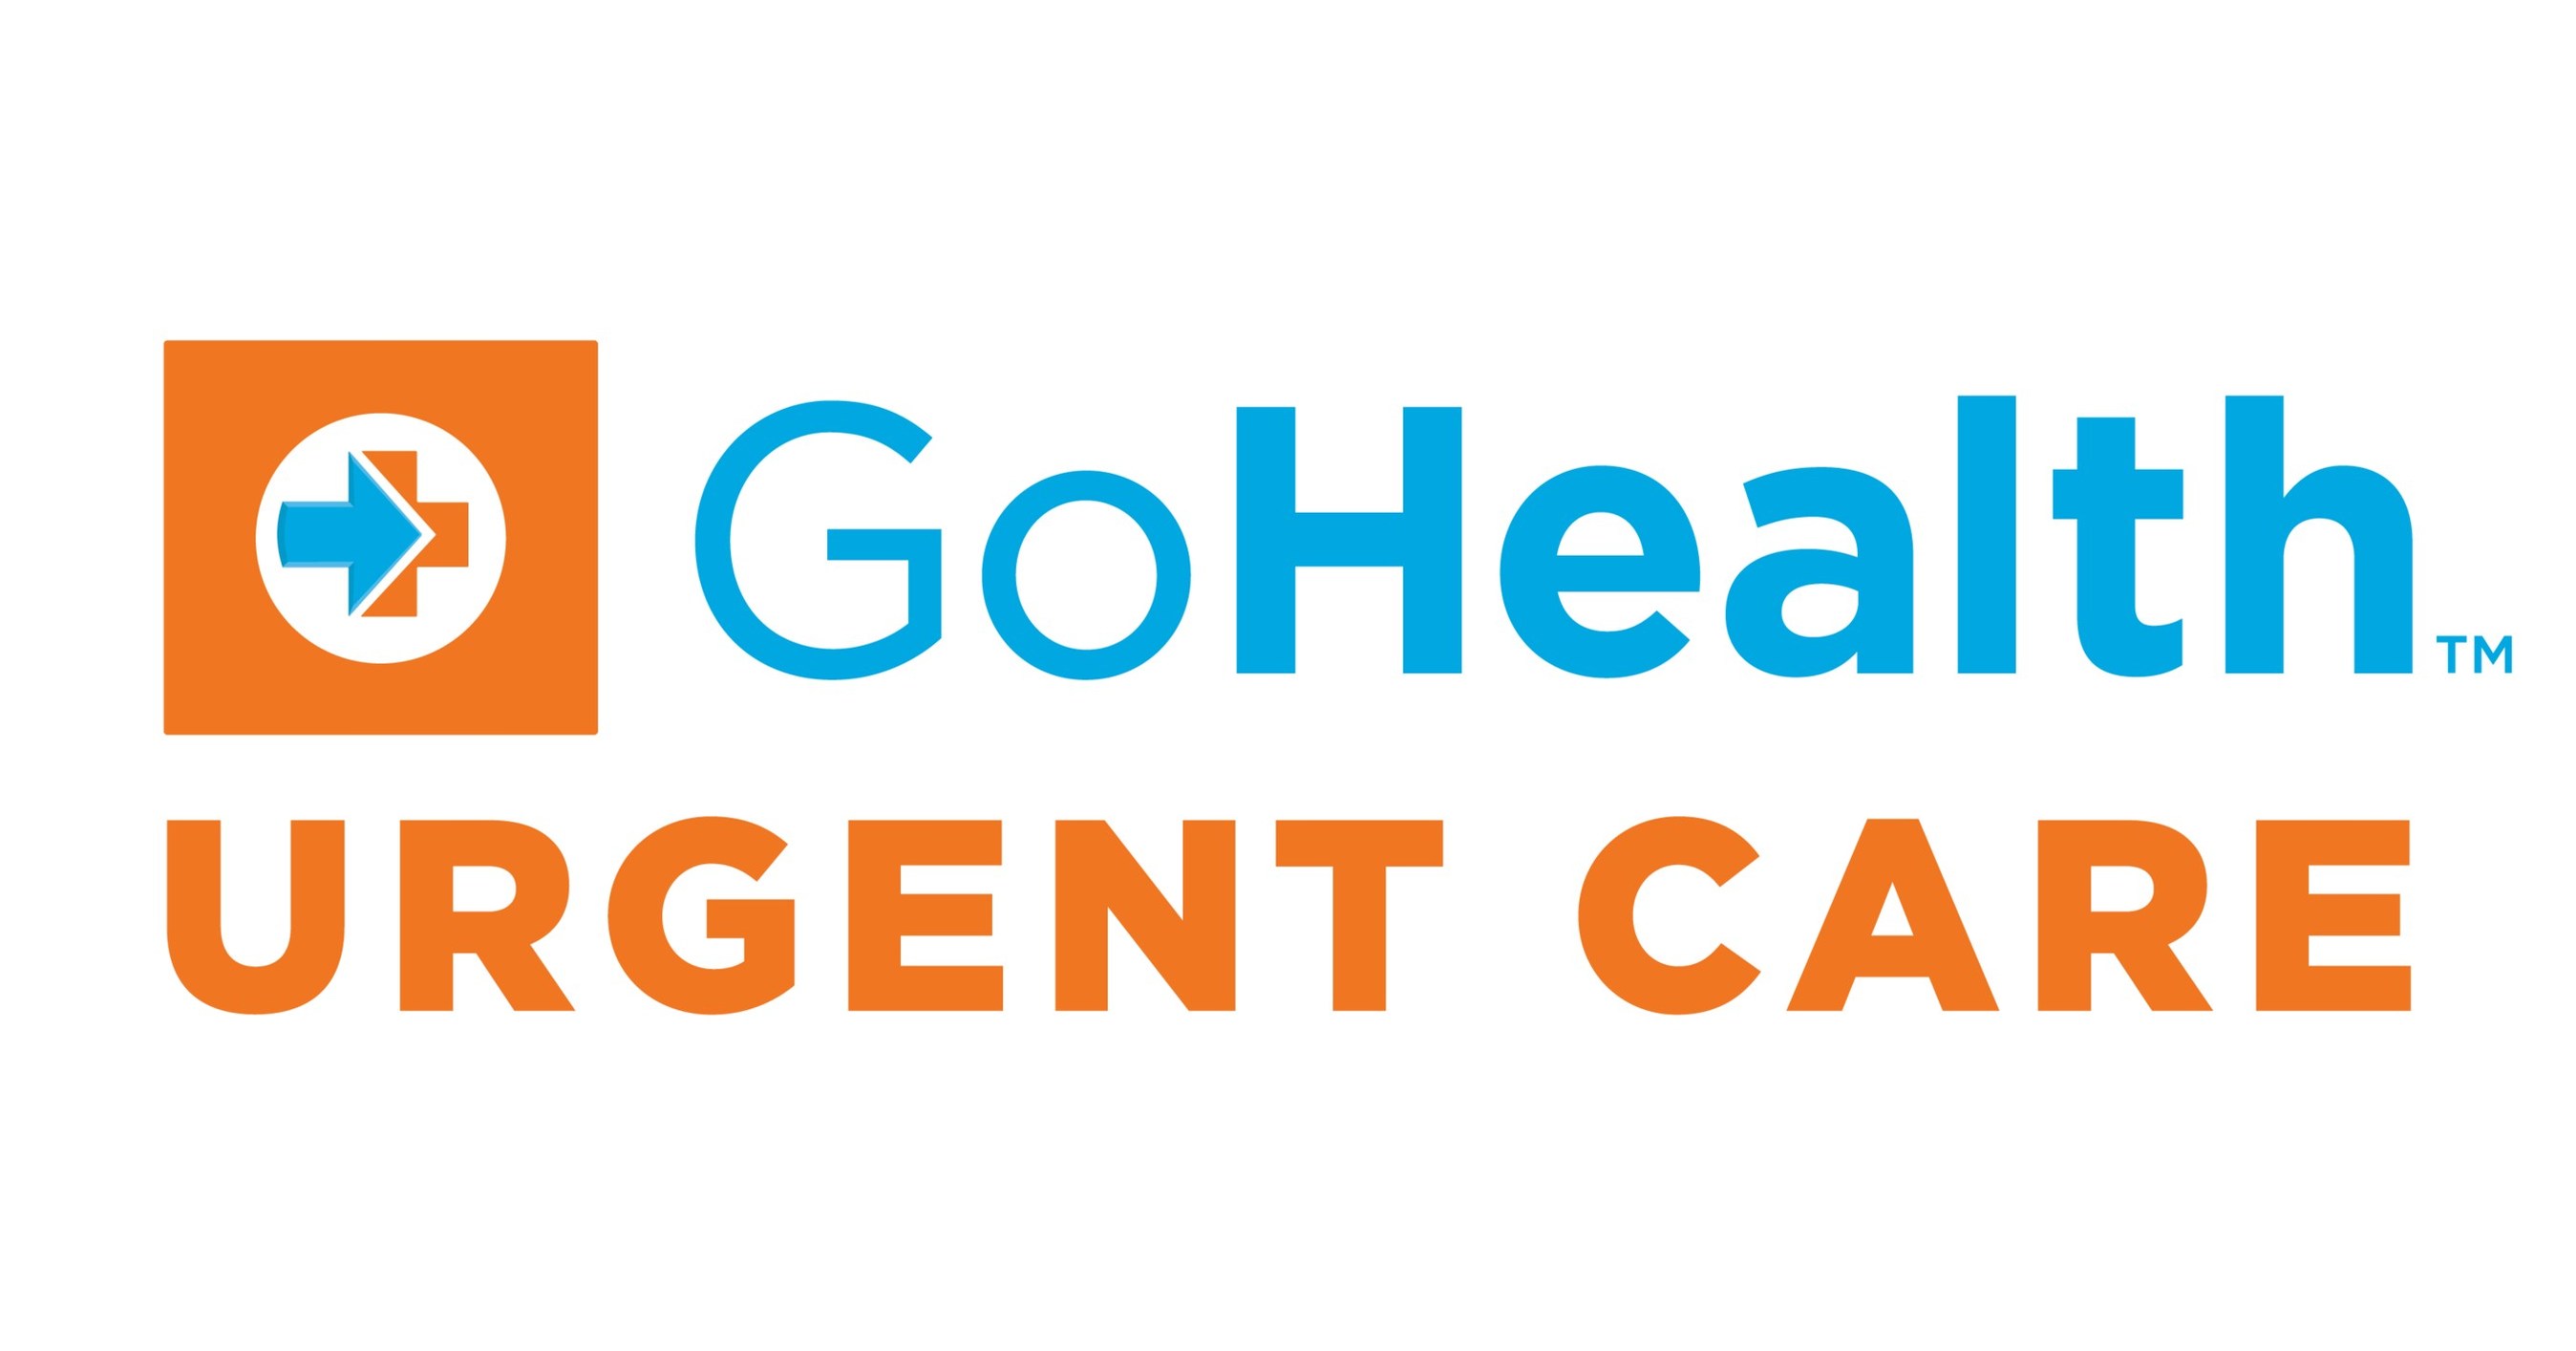 Gohealth Urgent Care First On West Coast To Offer Abbotts Rapid Covid-19 Molecular Test